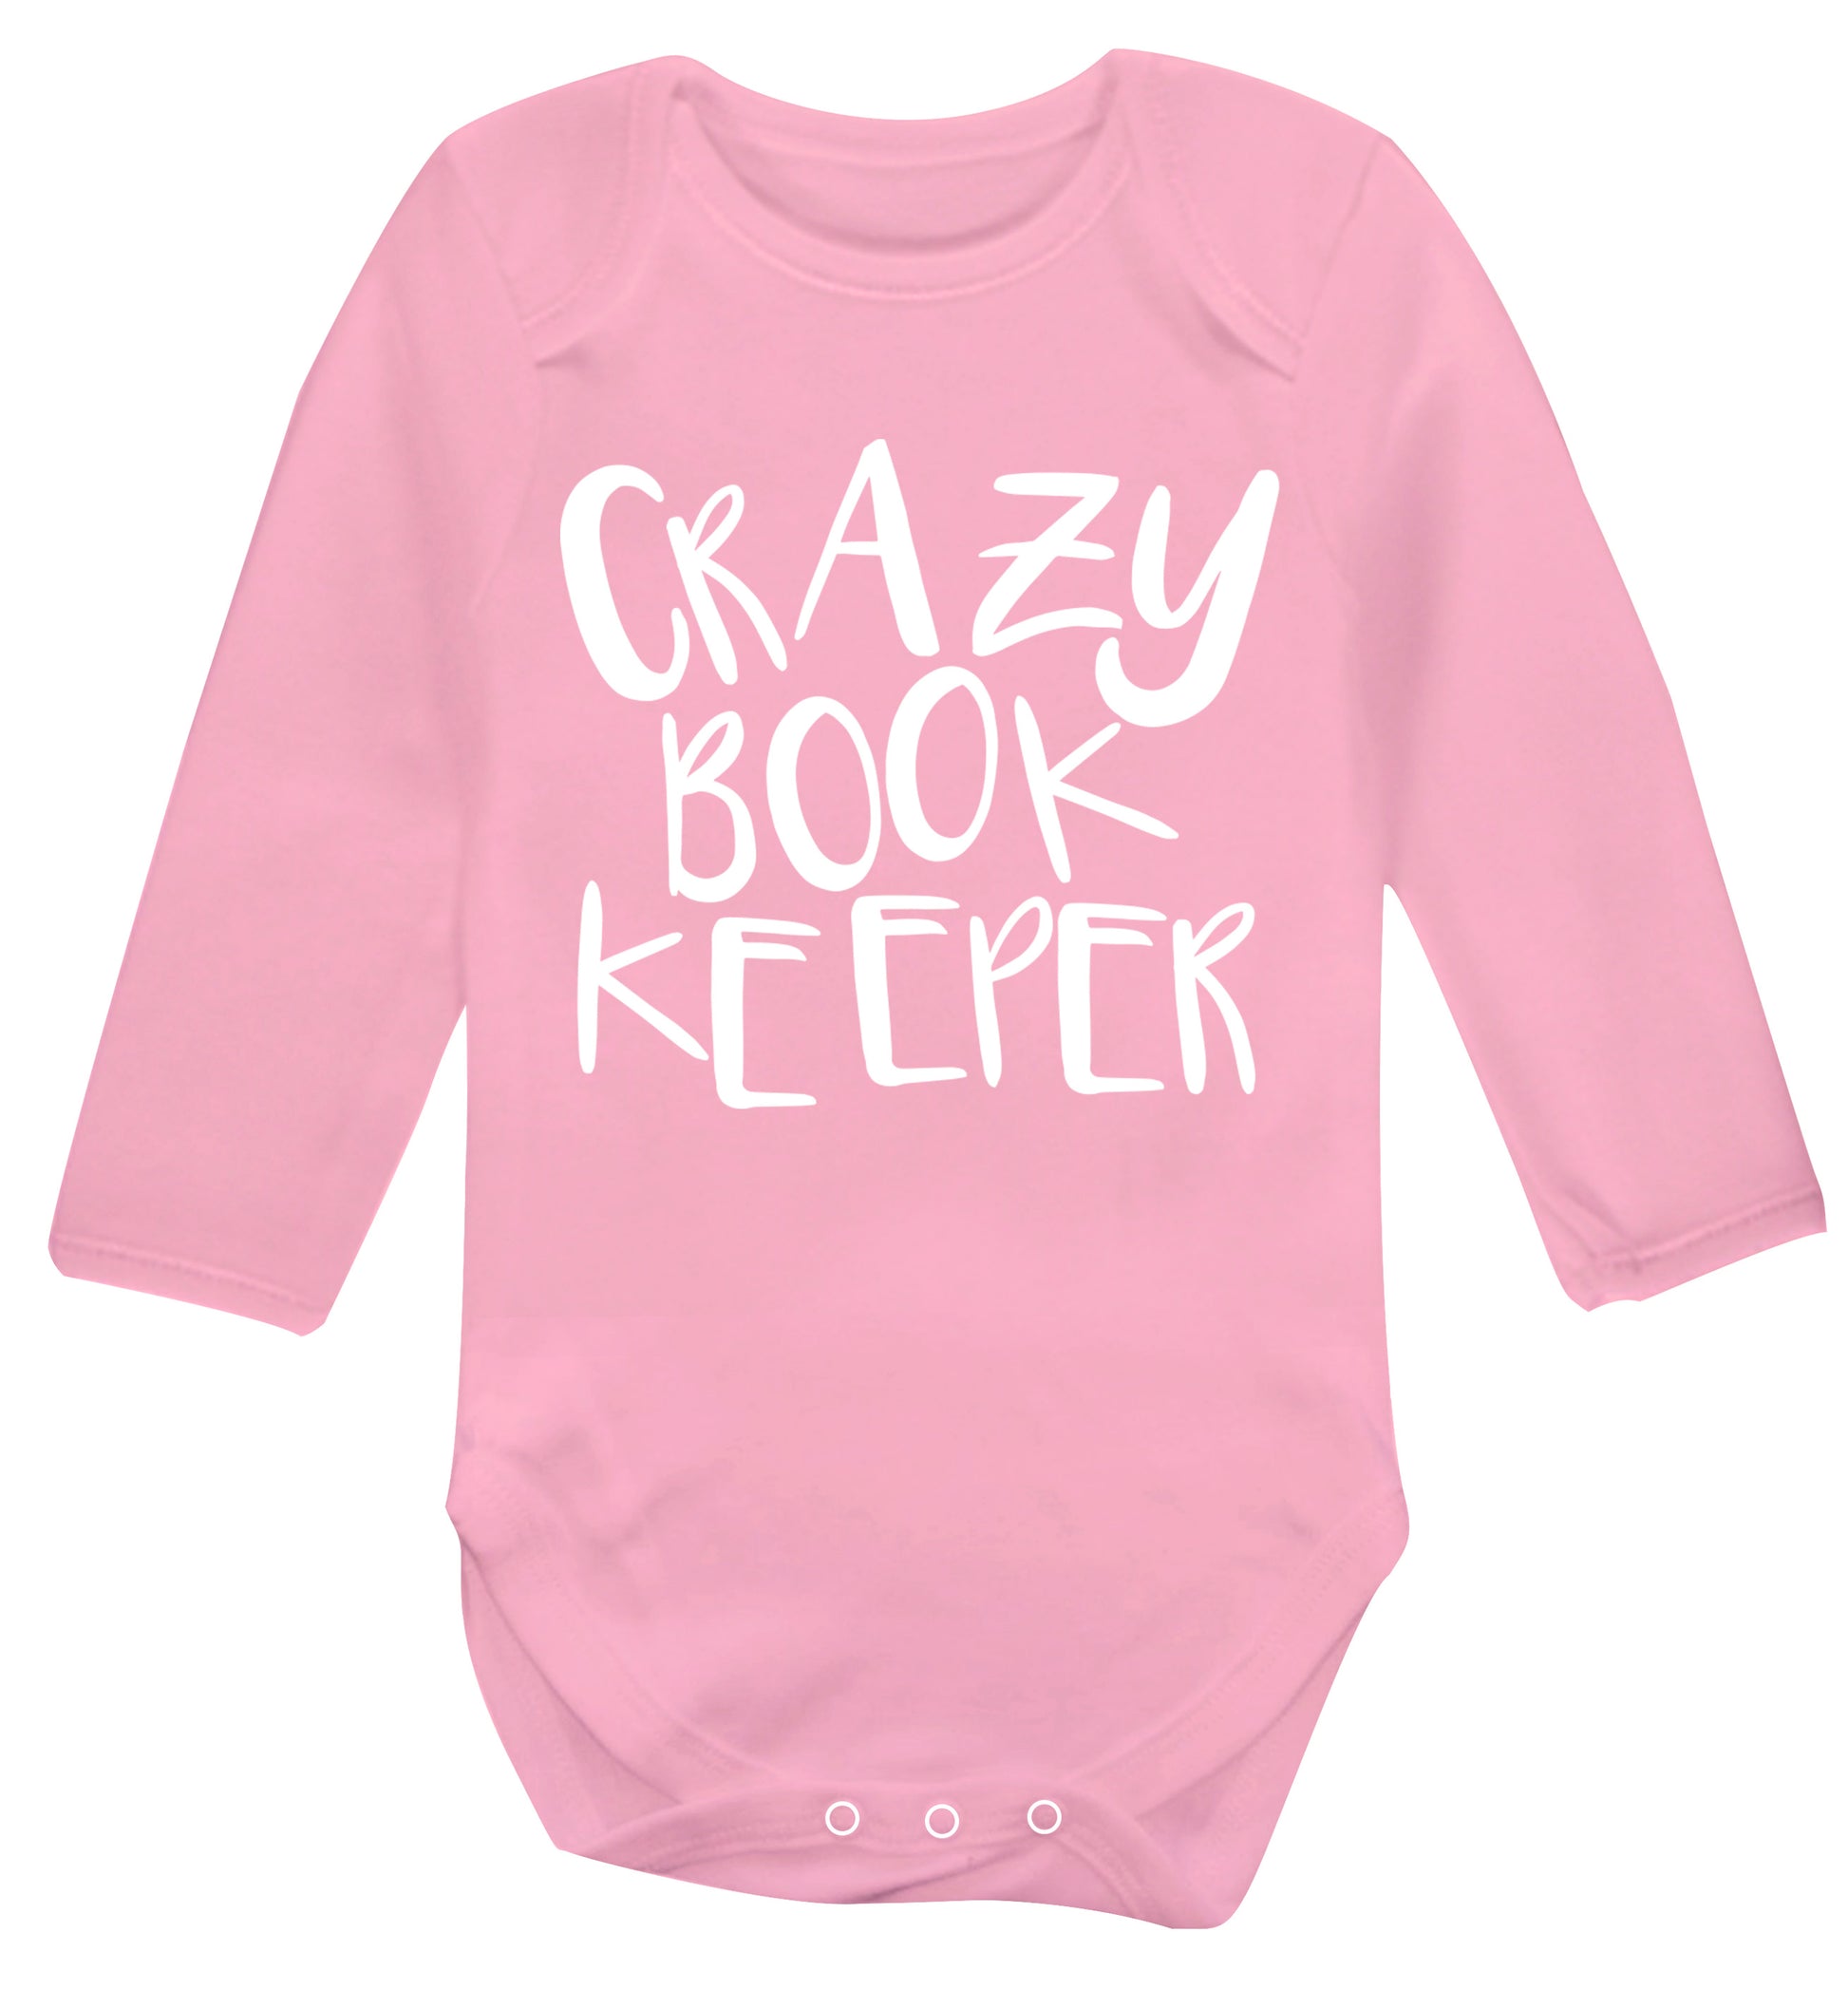 Crazy bookkeeper Baby Vest long sleeved pale pink 6-12 months